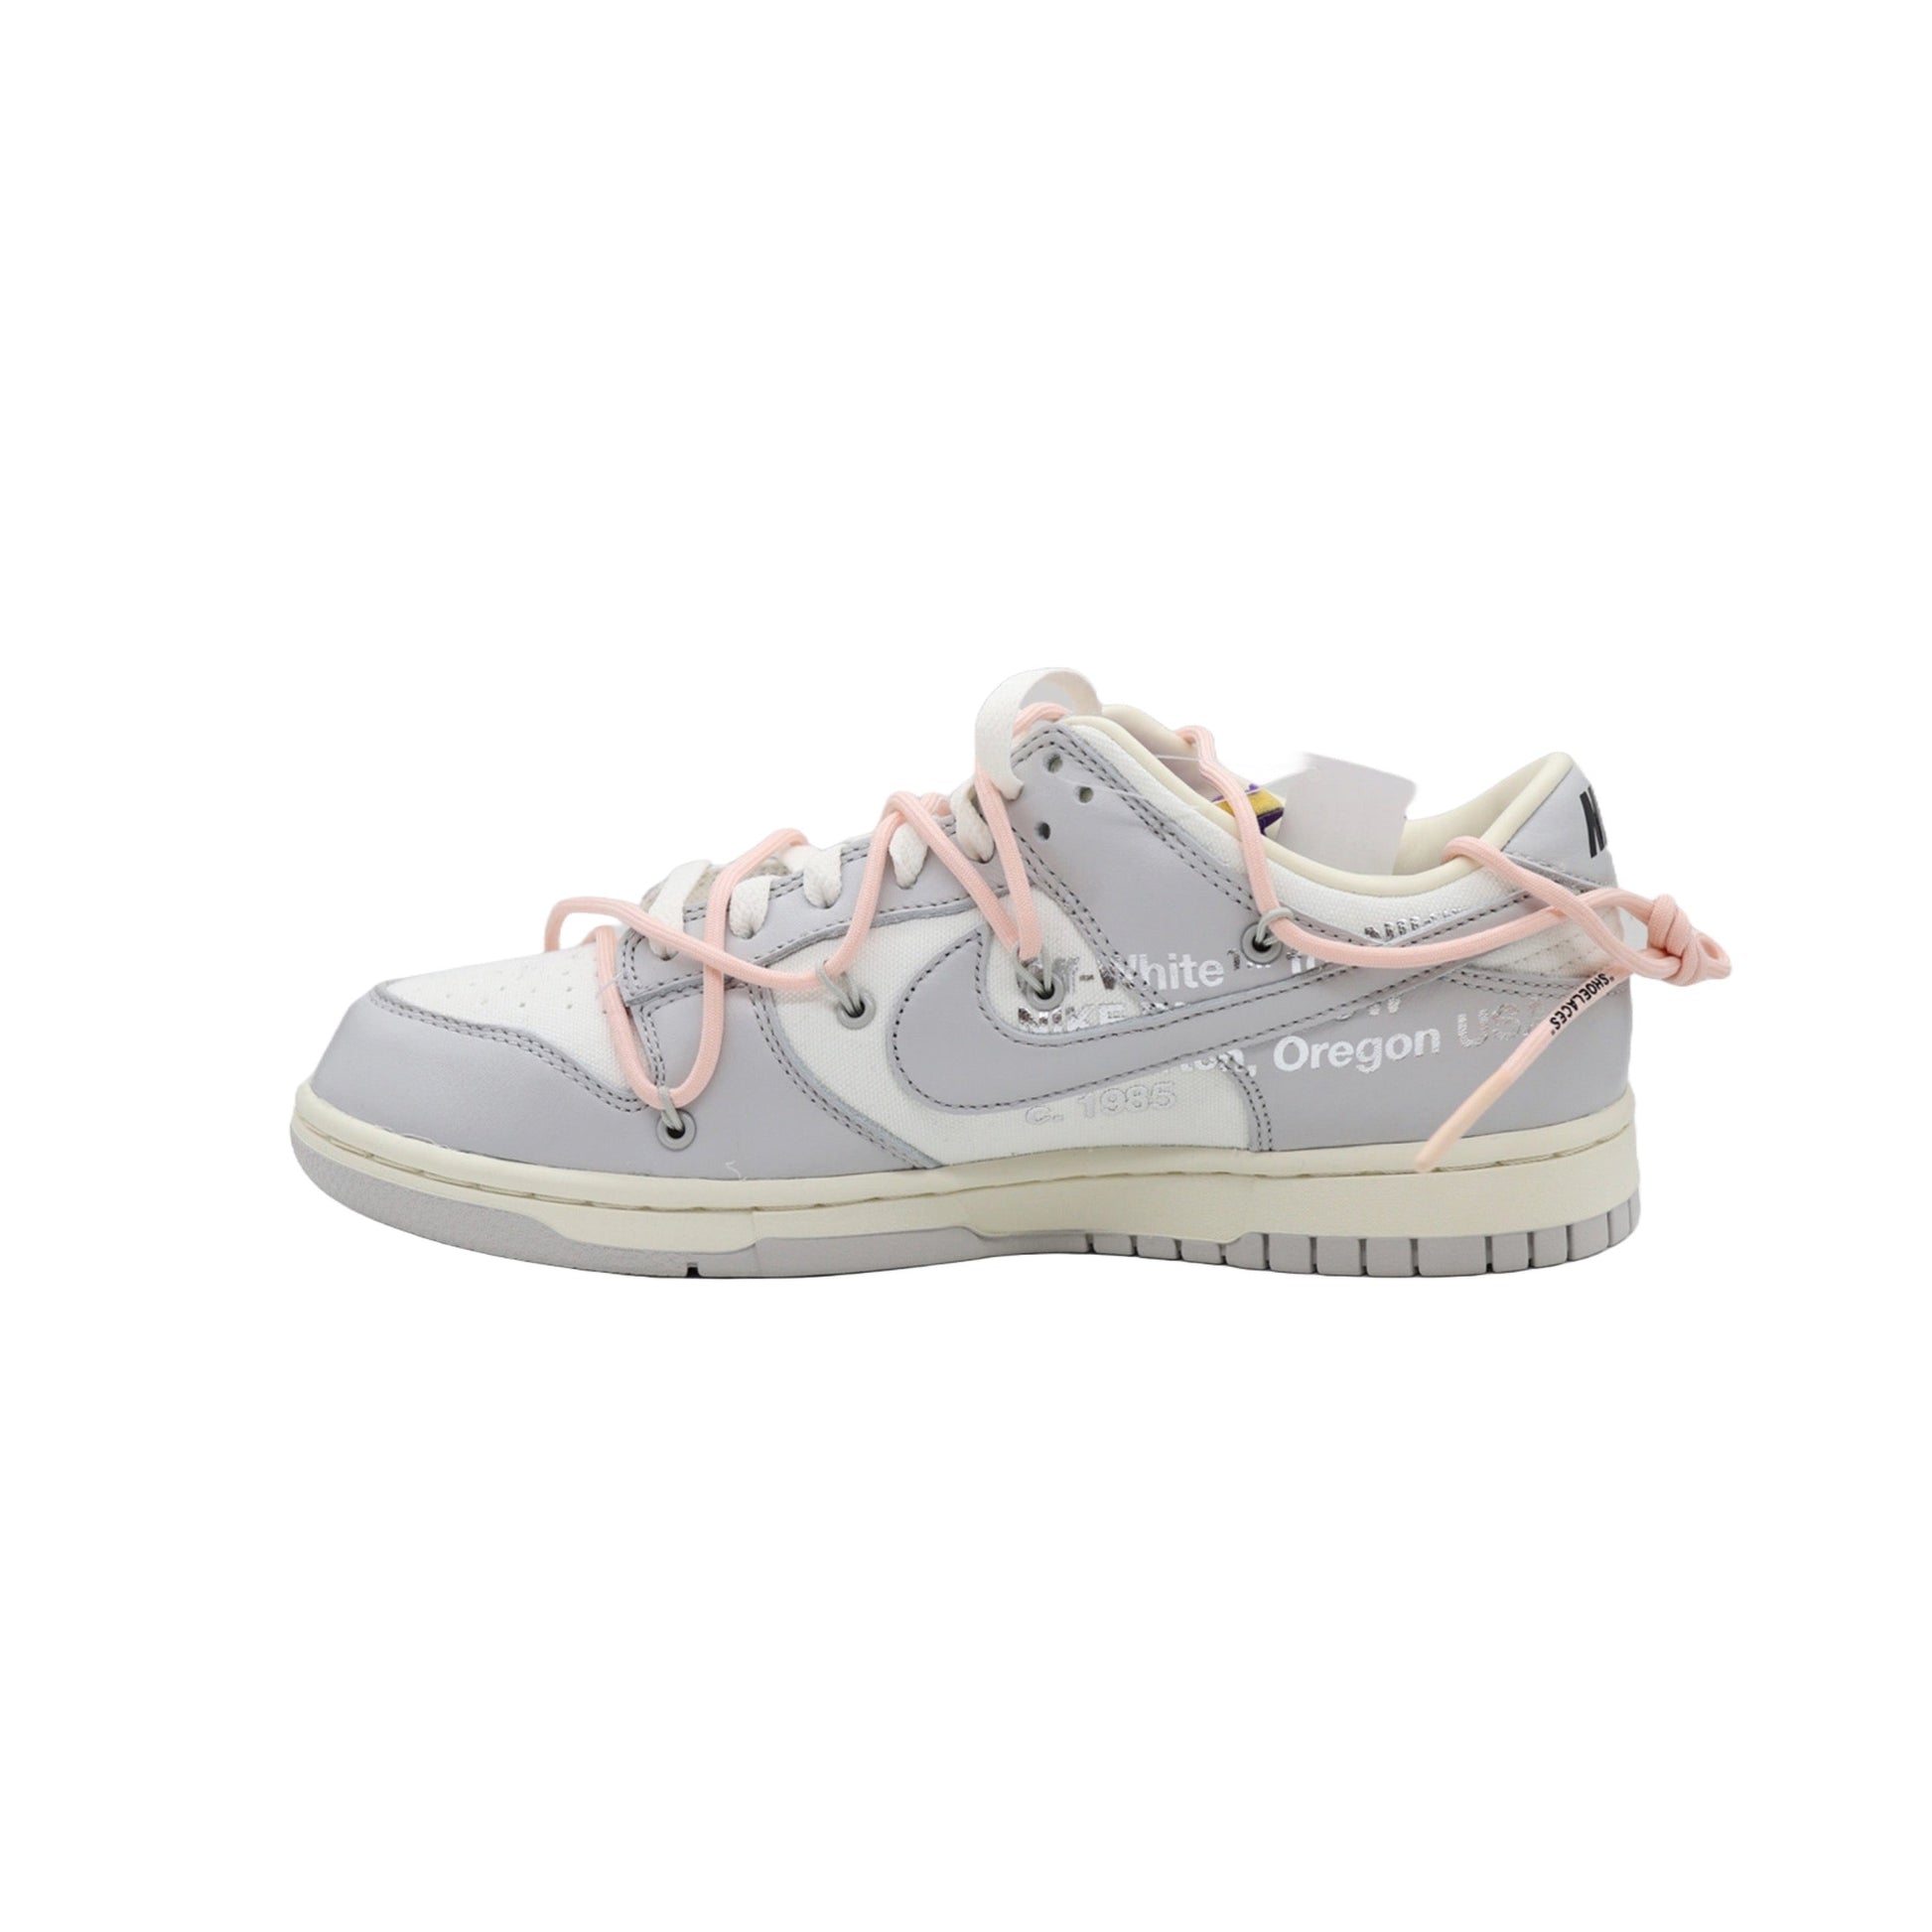 Nike Dunk Low Off-White, Lot 24 of 50